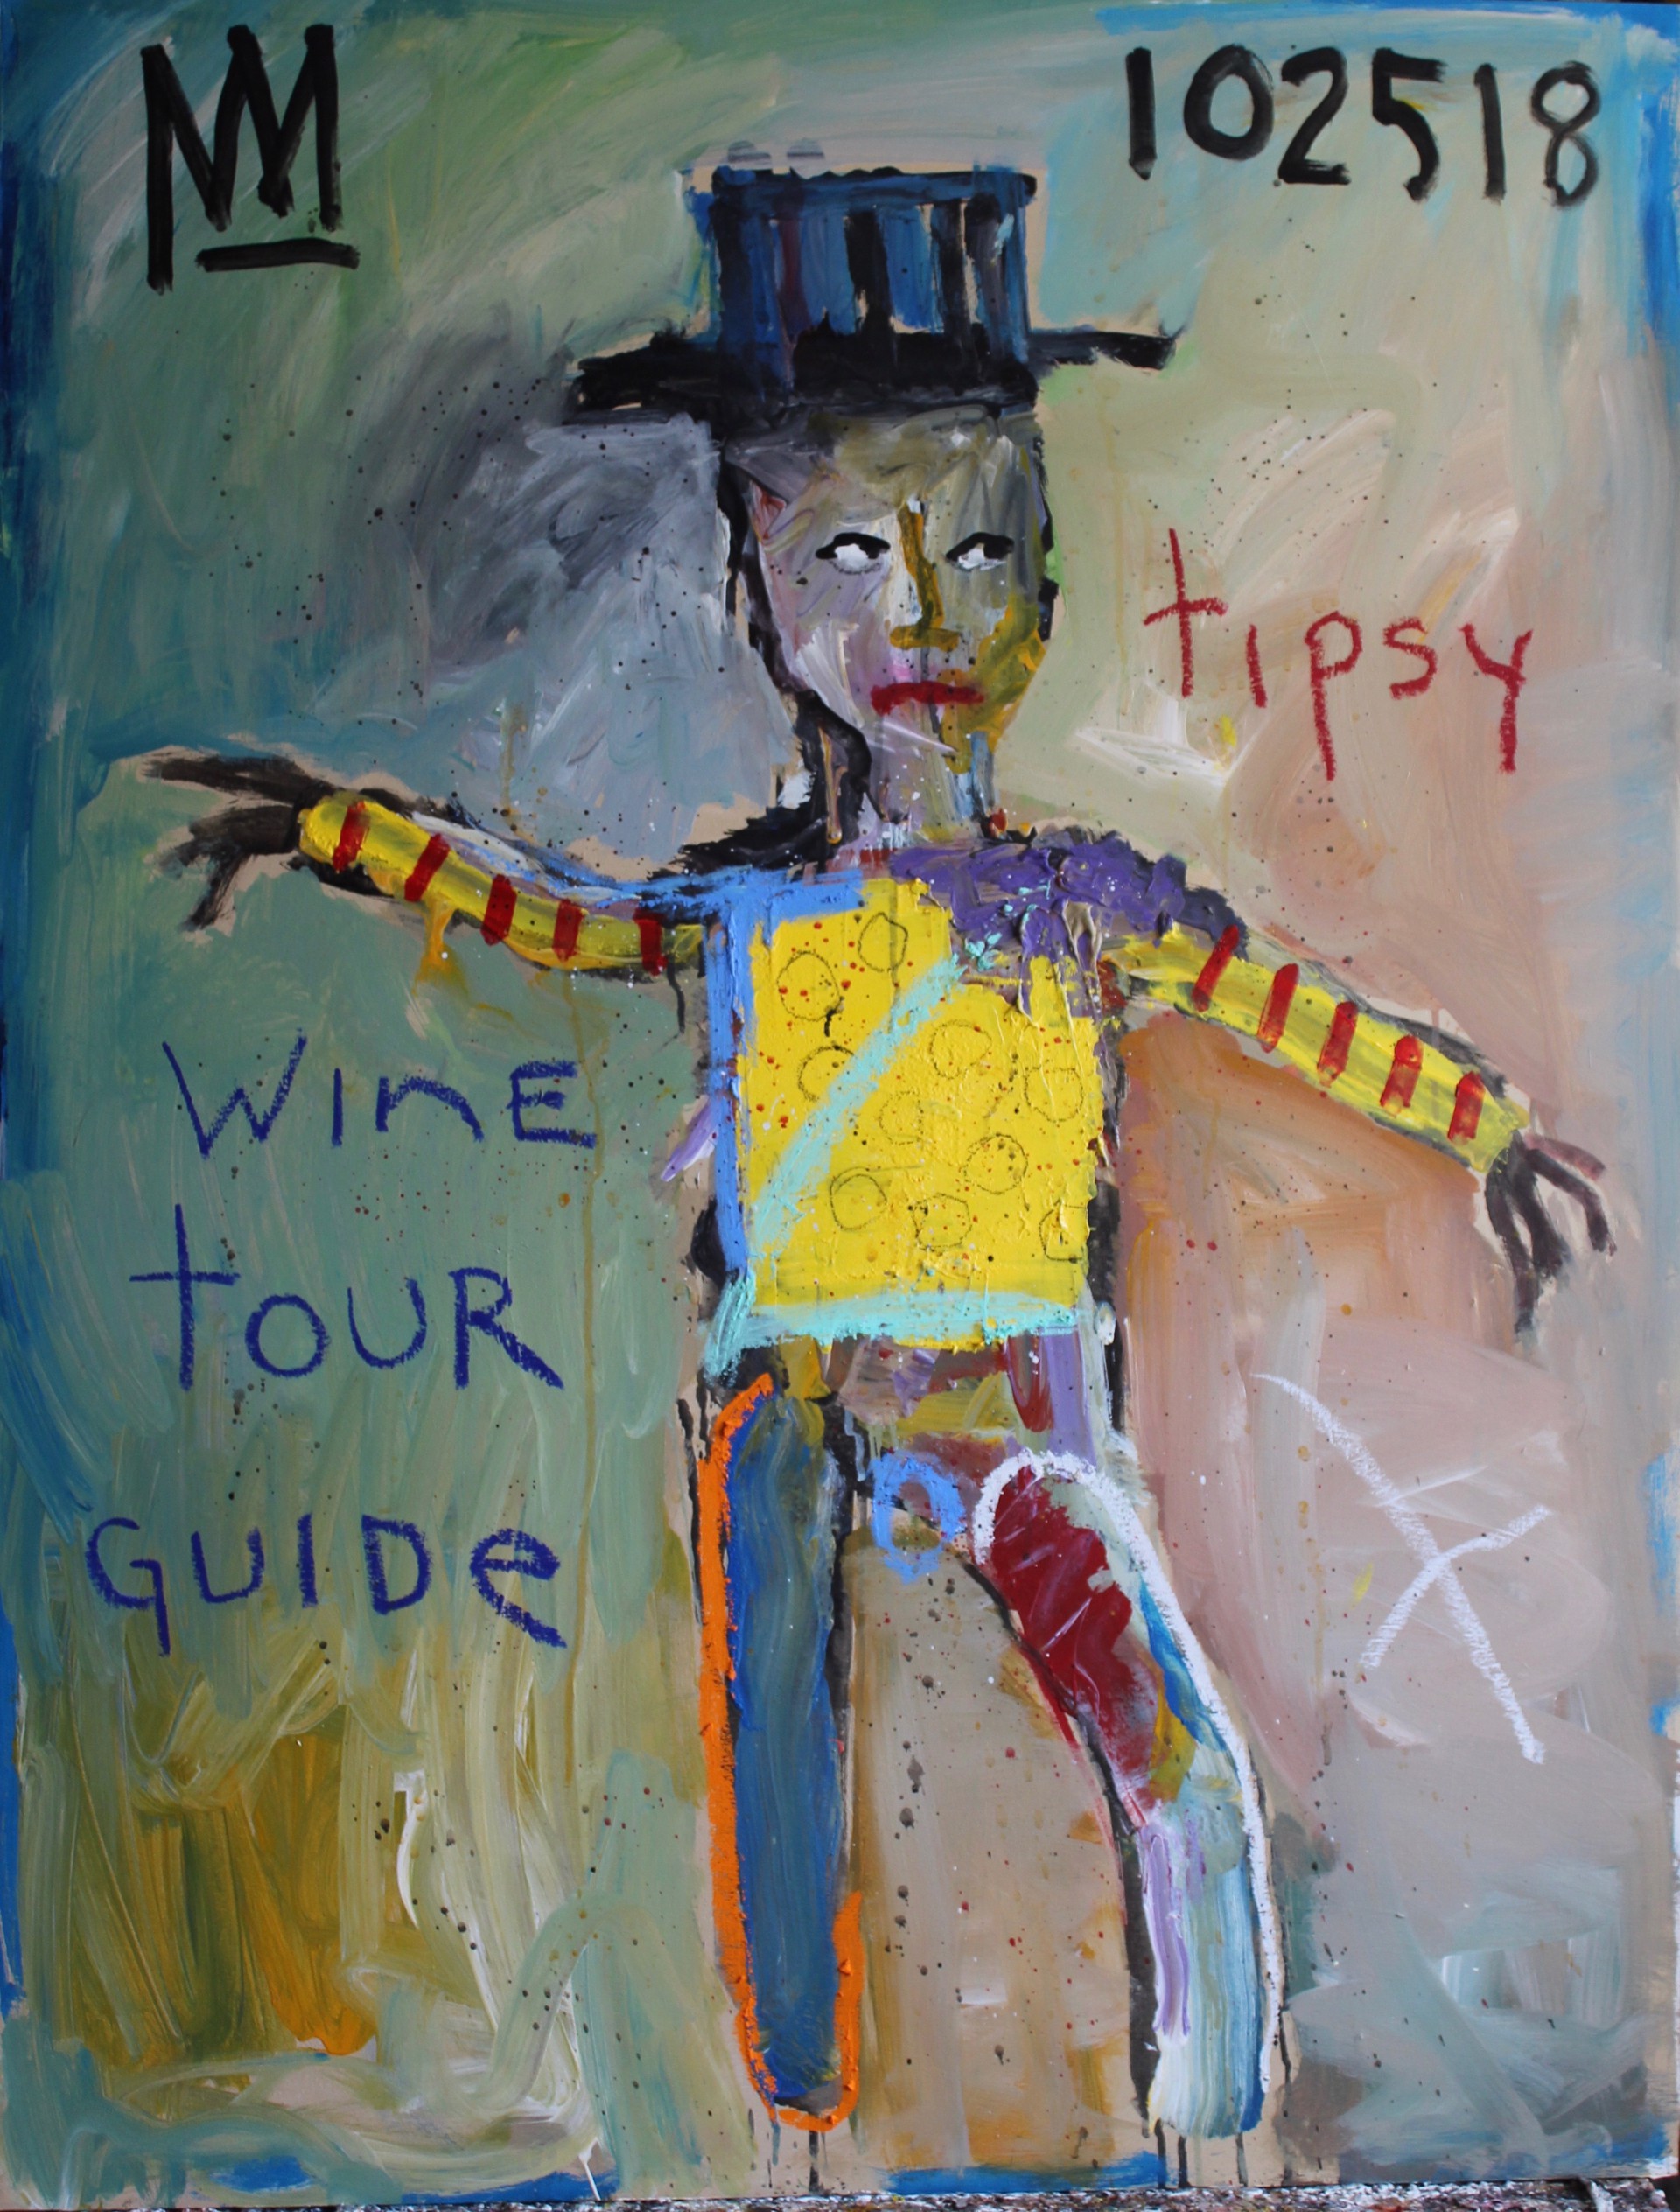 Tipsy Wine Tour Guide by Michael Snodgrass